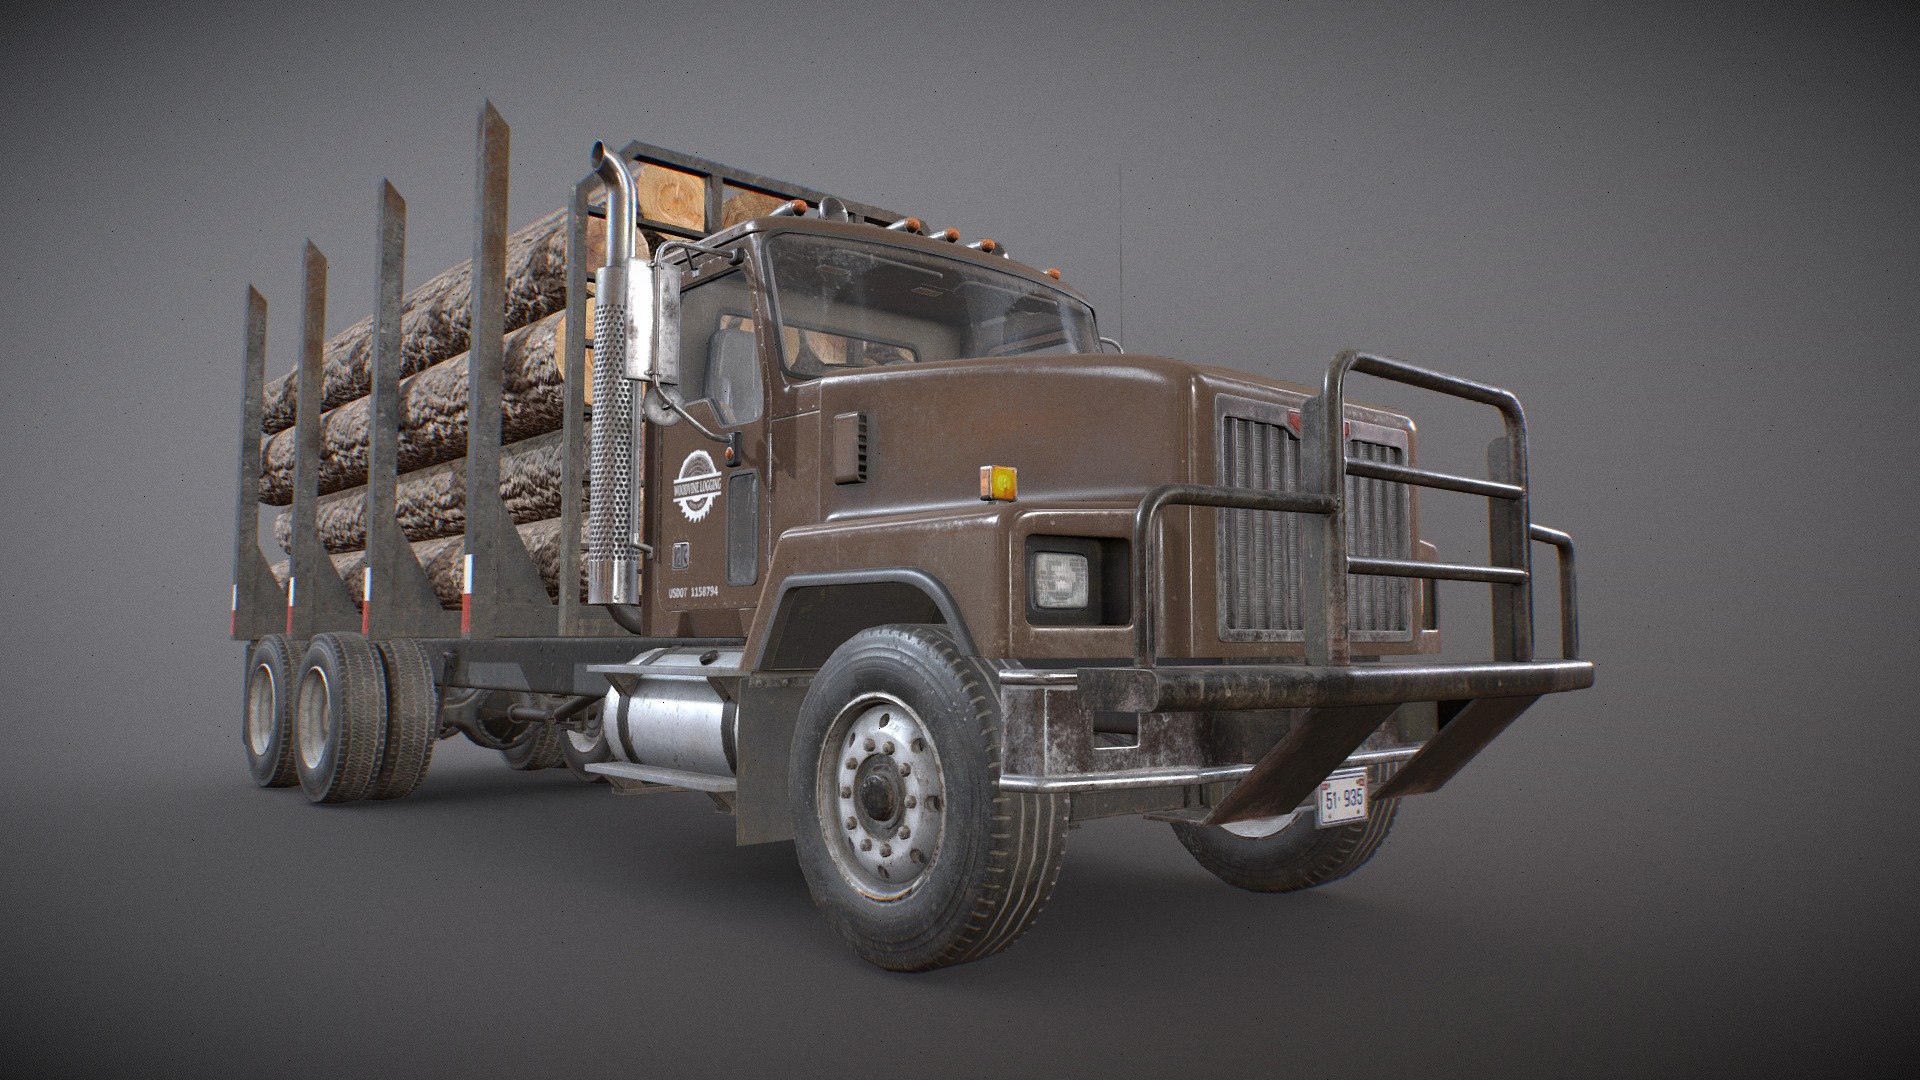 Low Poly 3D model of a generic Classic Logging Truck:




Real-world scale and centered.

The unit of measurement used for the model is centimeters

Doors, wheels and steering wheel are separated and can be easily removed or rigged/animated (model not animated).

Interior and logs are separate objects to detach if needed.

PBR textures made in Substance Painter

All branding and labels are custom made.

Model also compatible with other &ldquo;Classic Truck